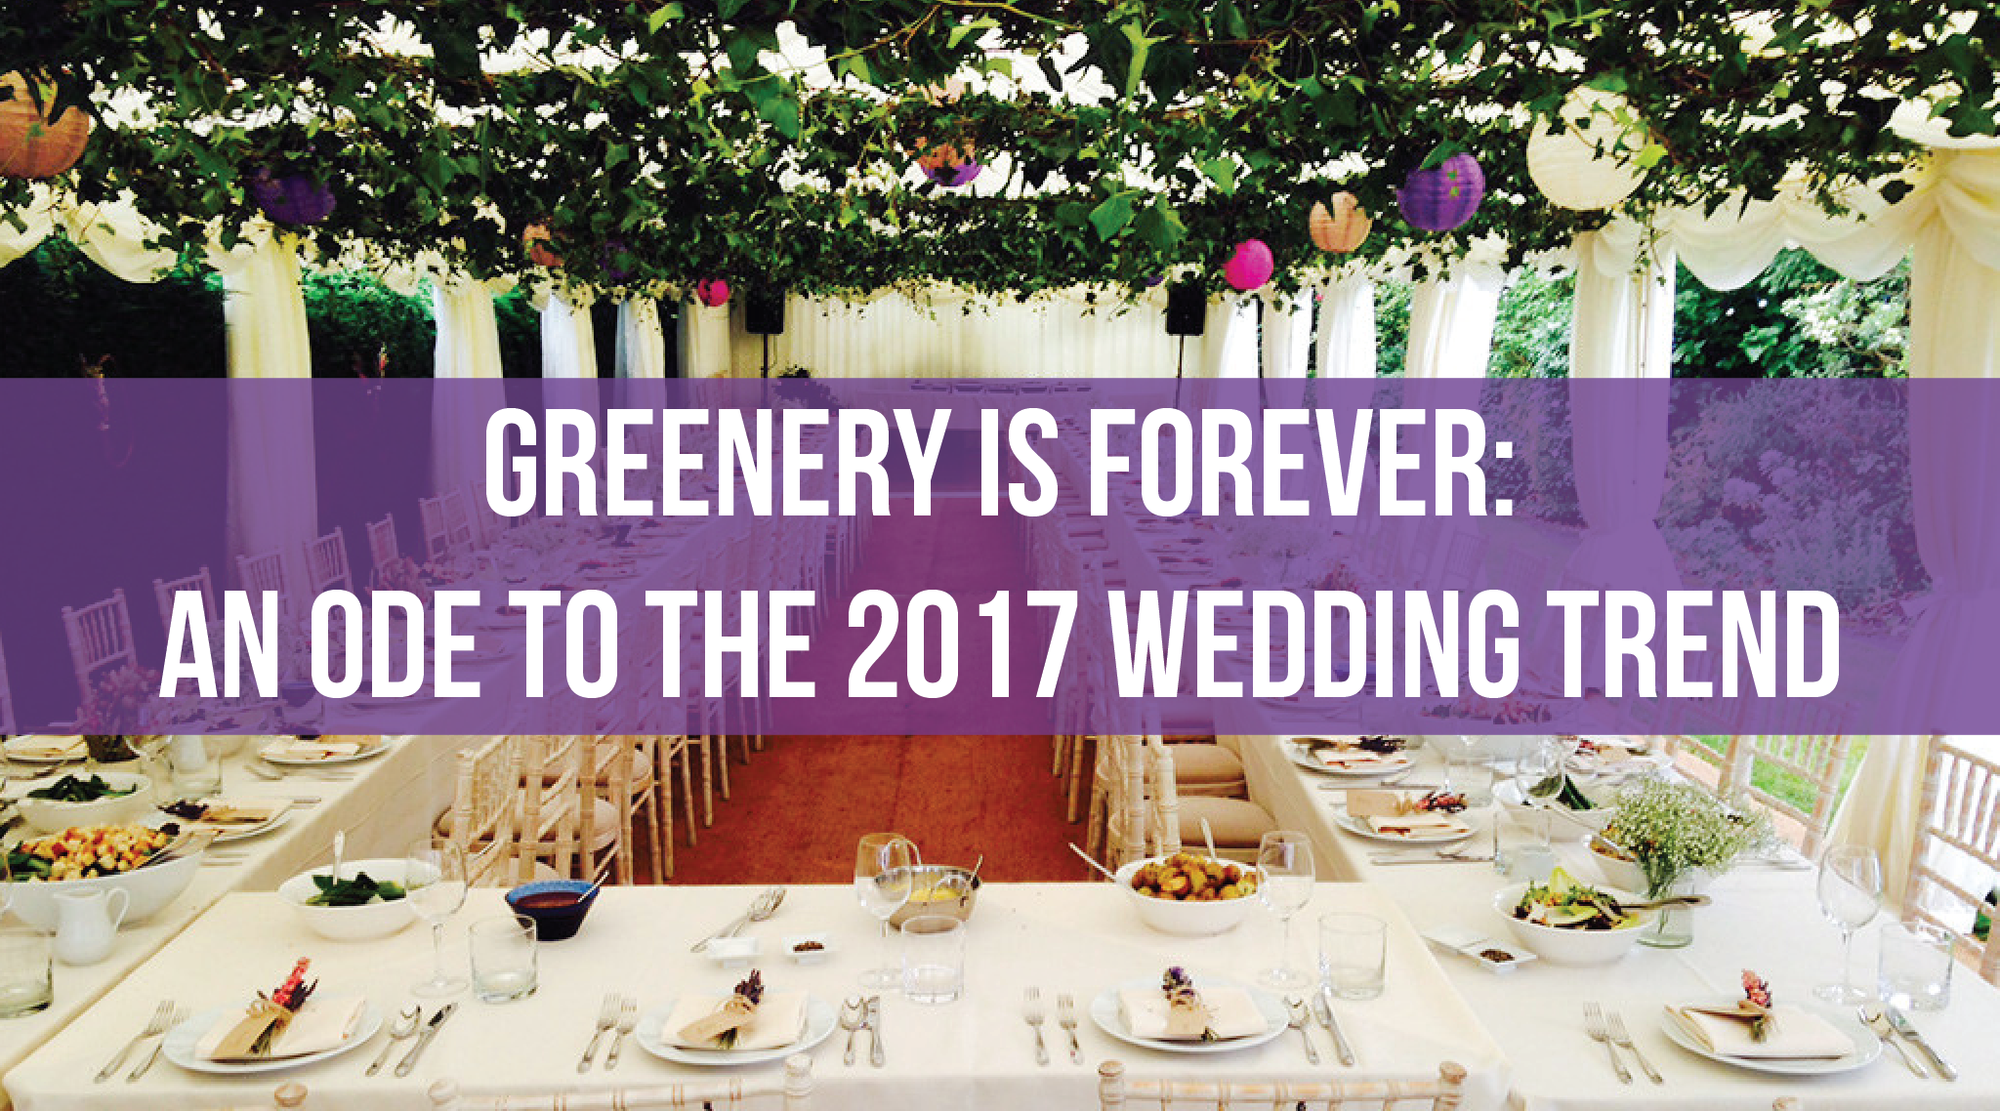 Greenery is Forever: An Ode to the 2017 Wedding Trend